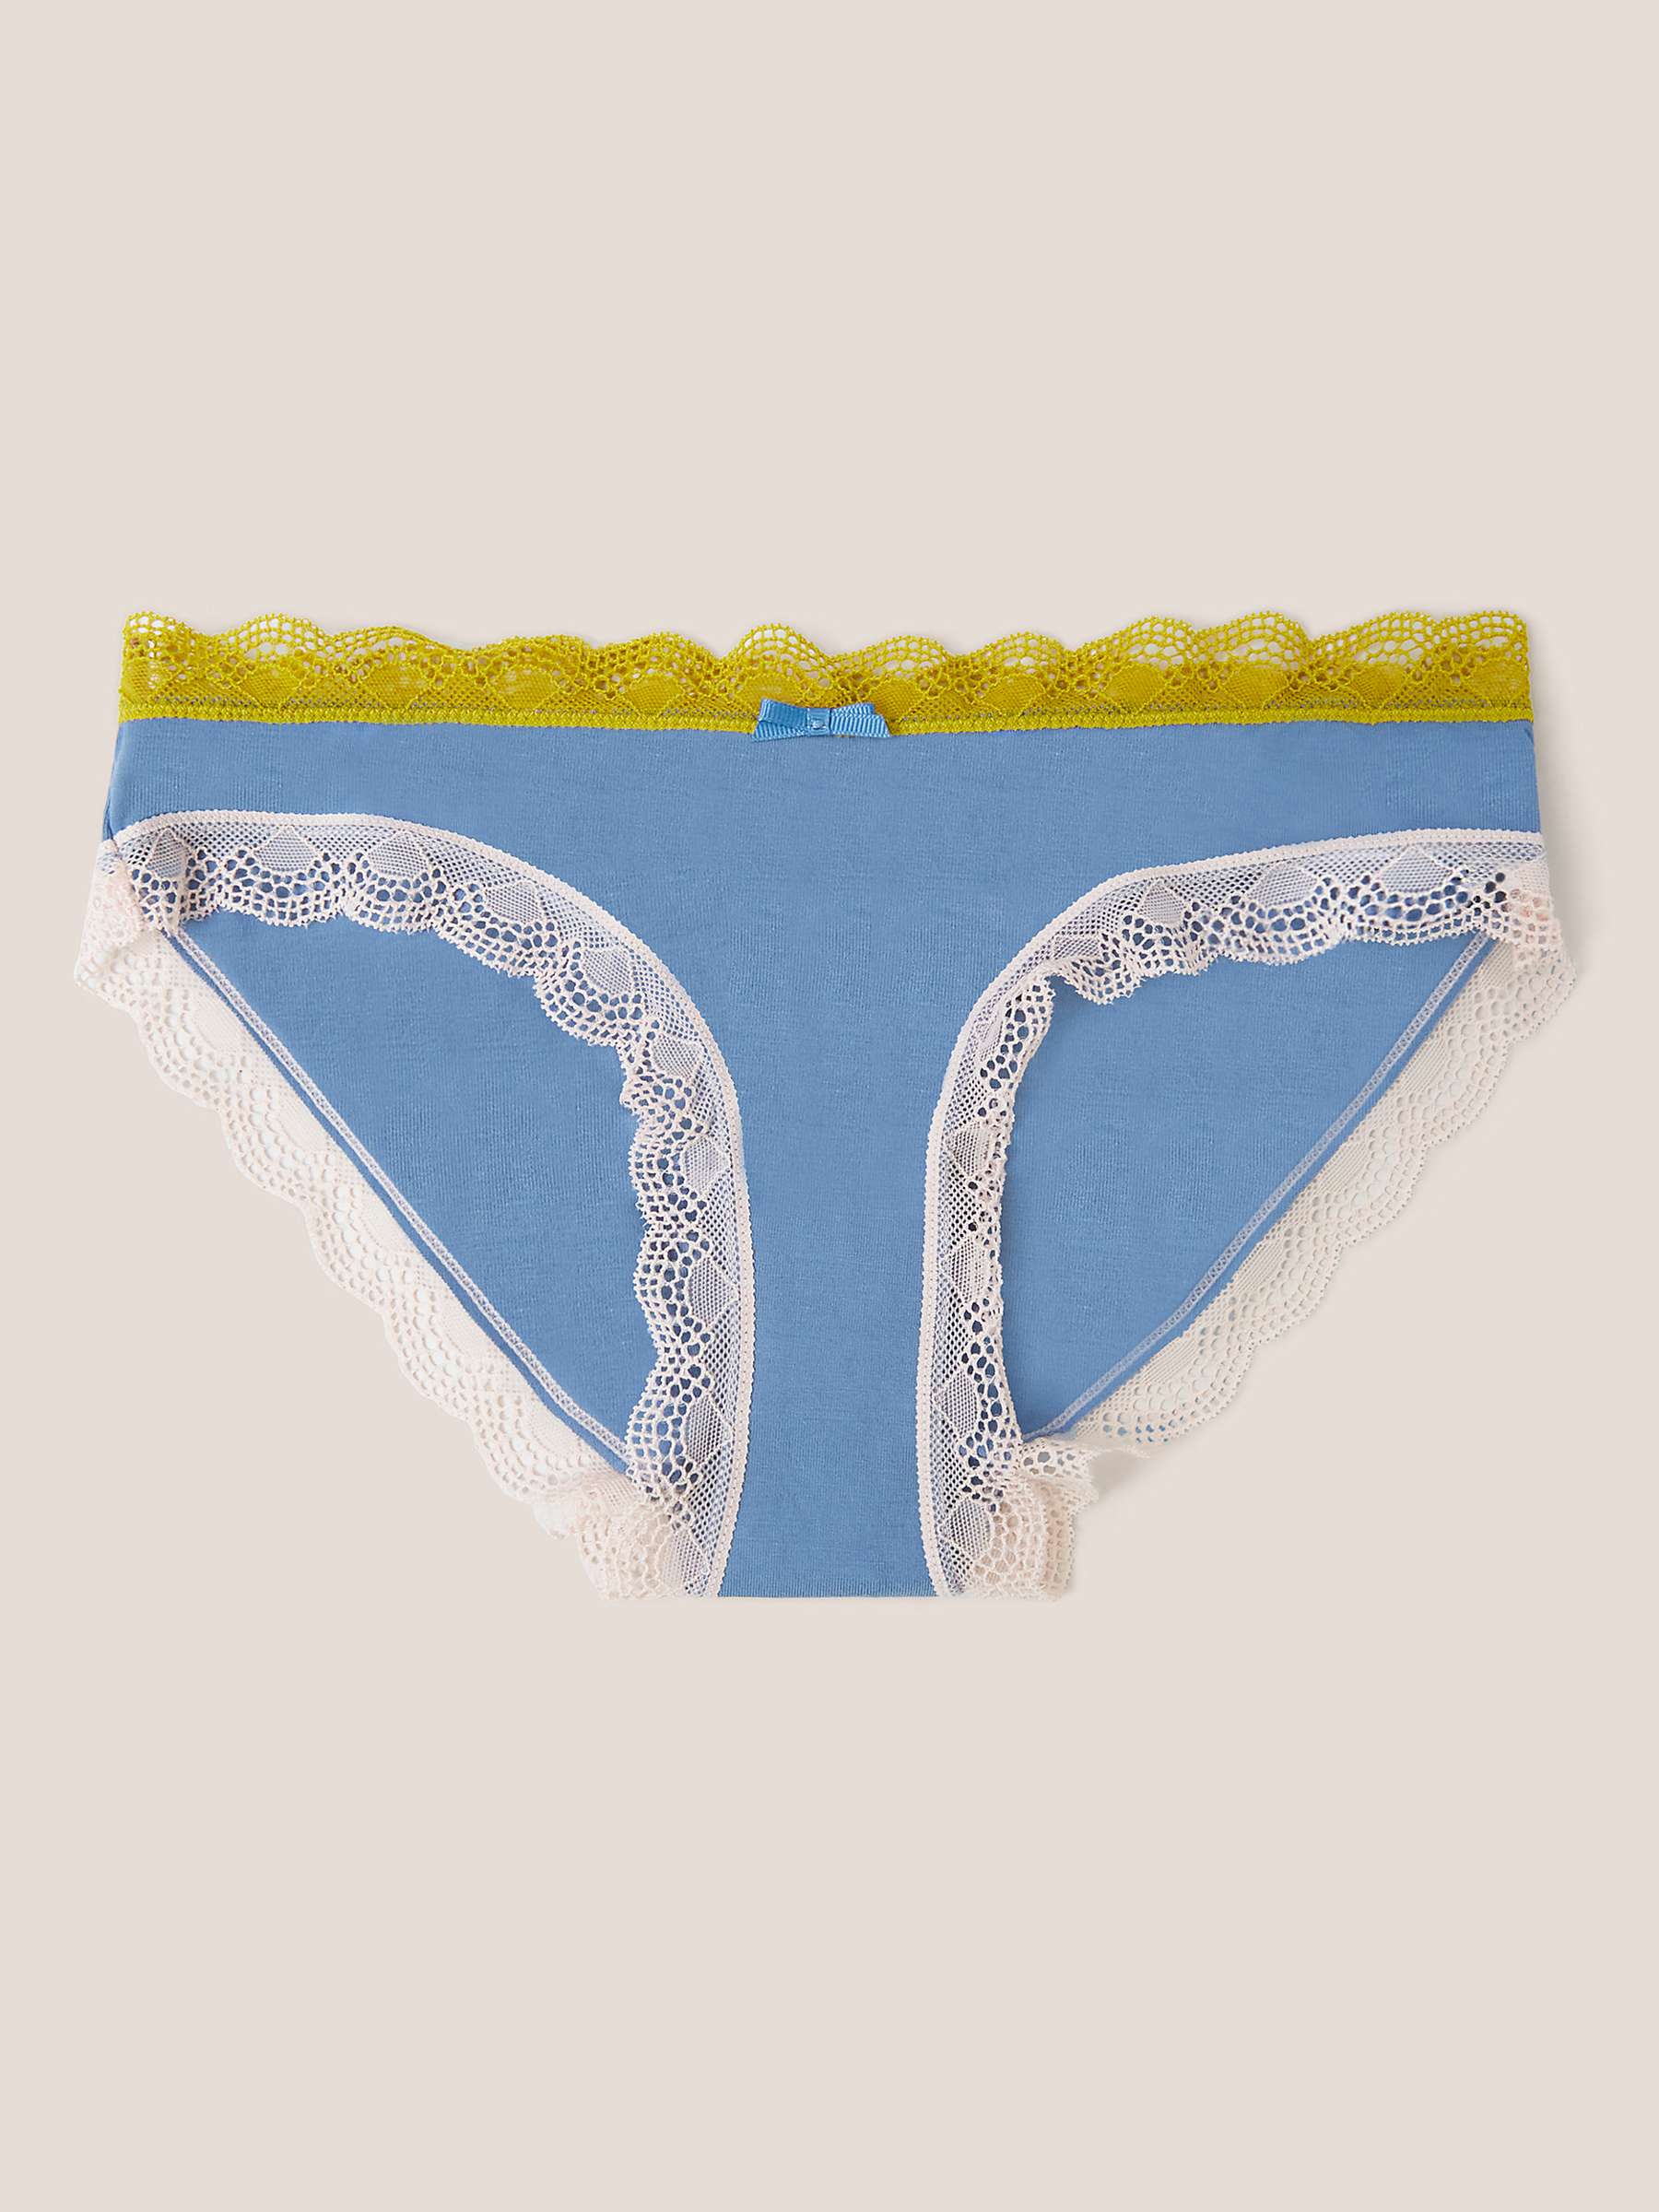 Buy White Stuff Lace Detailing Knickers, Blue/Multi Online at johnlewis.com